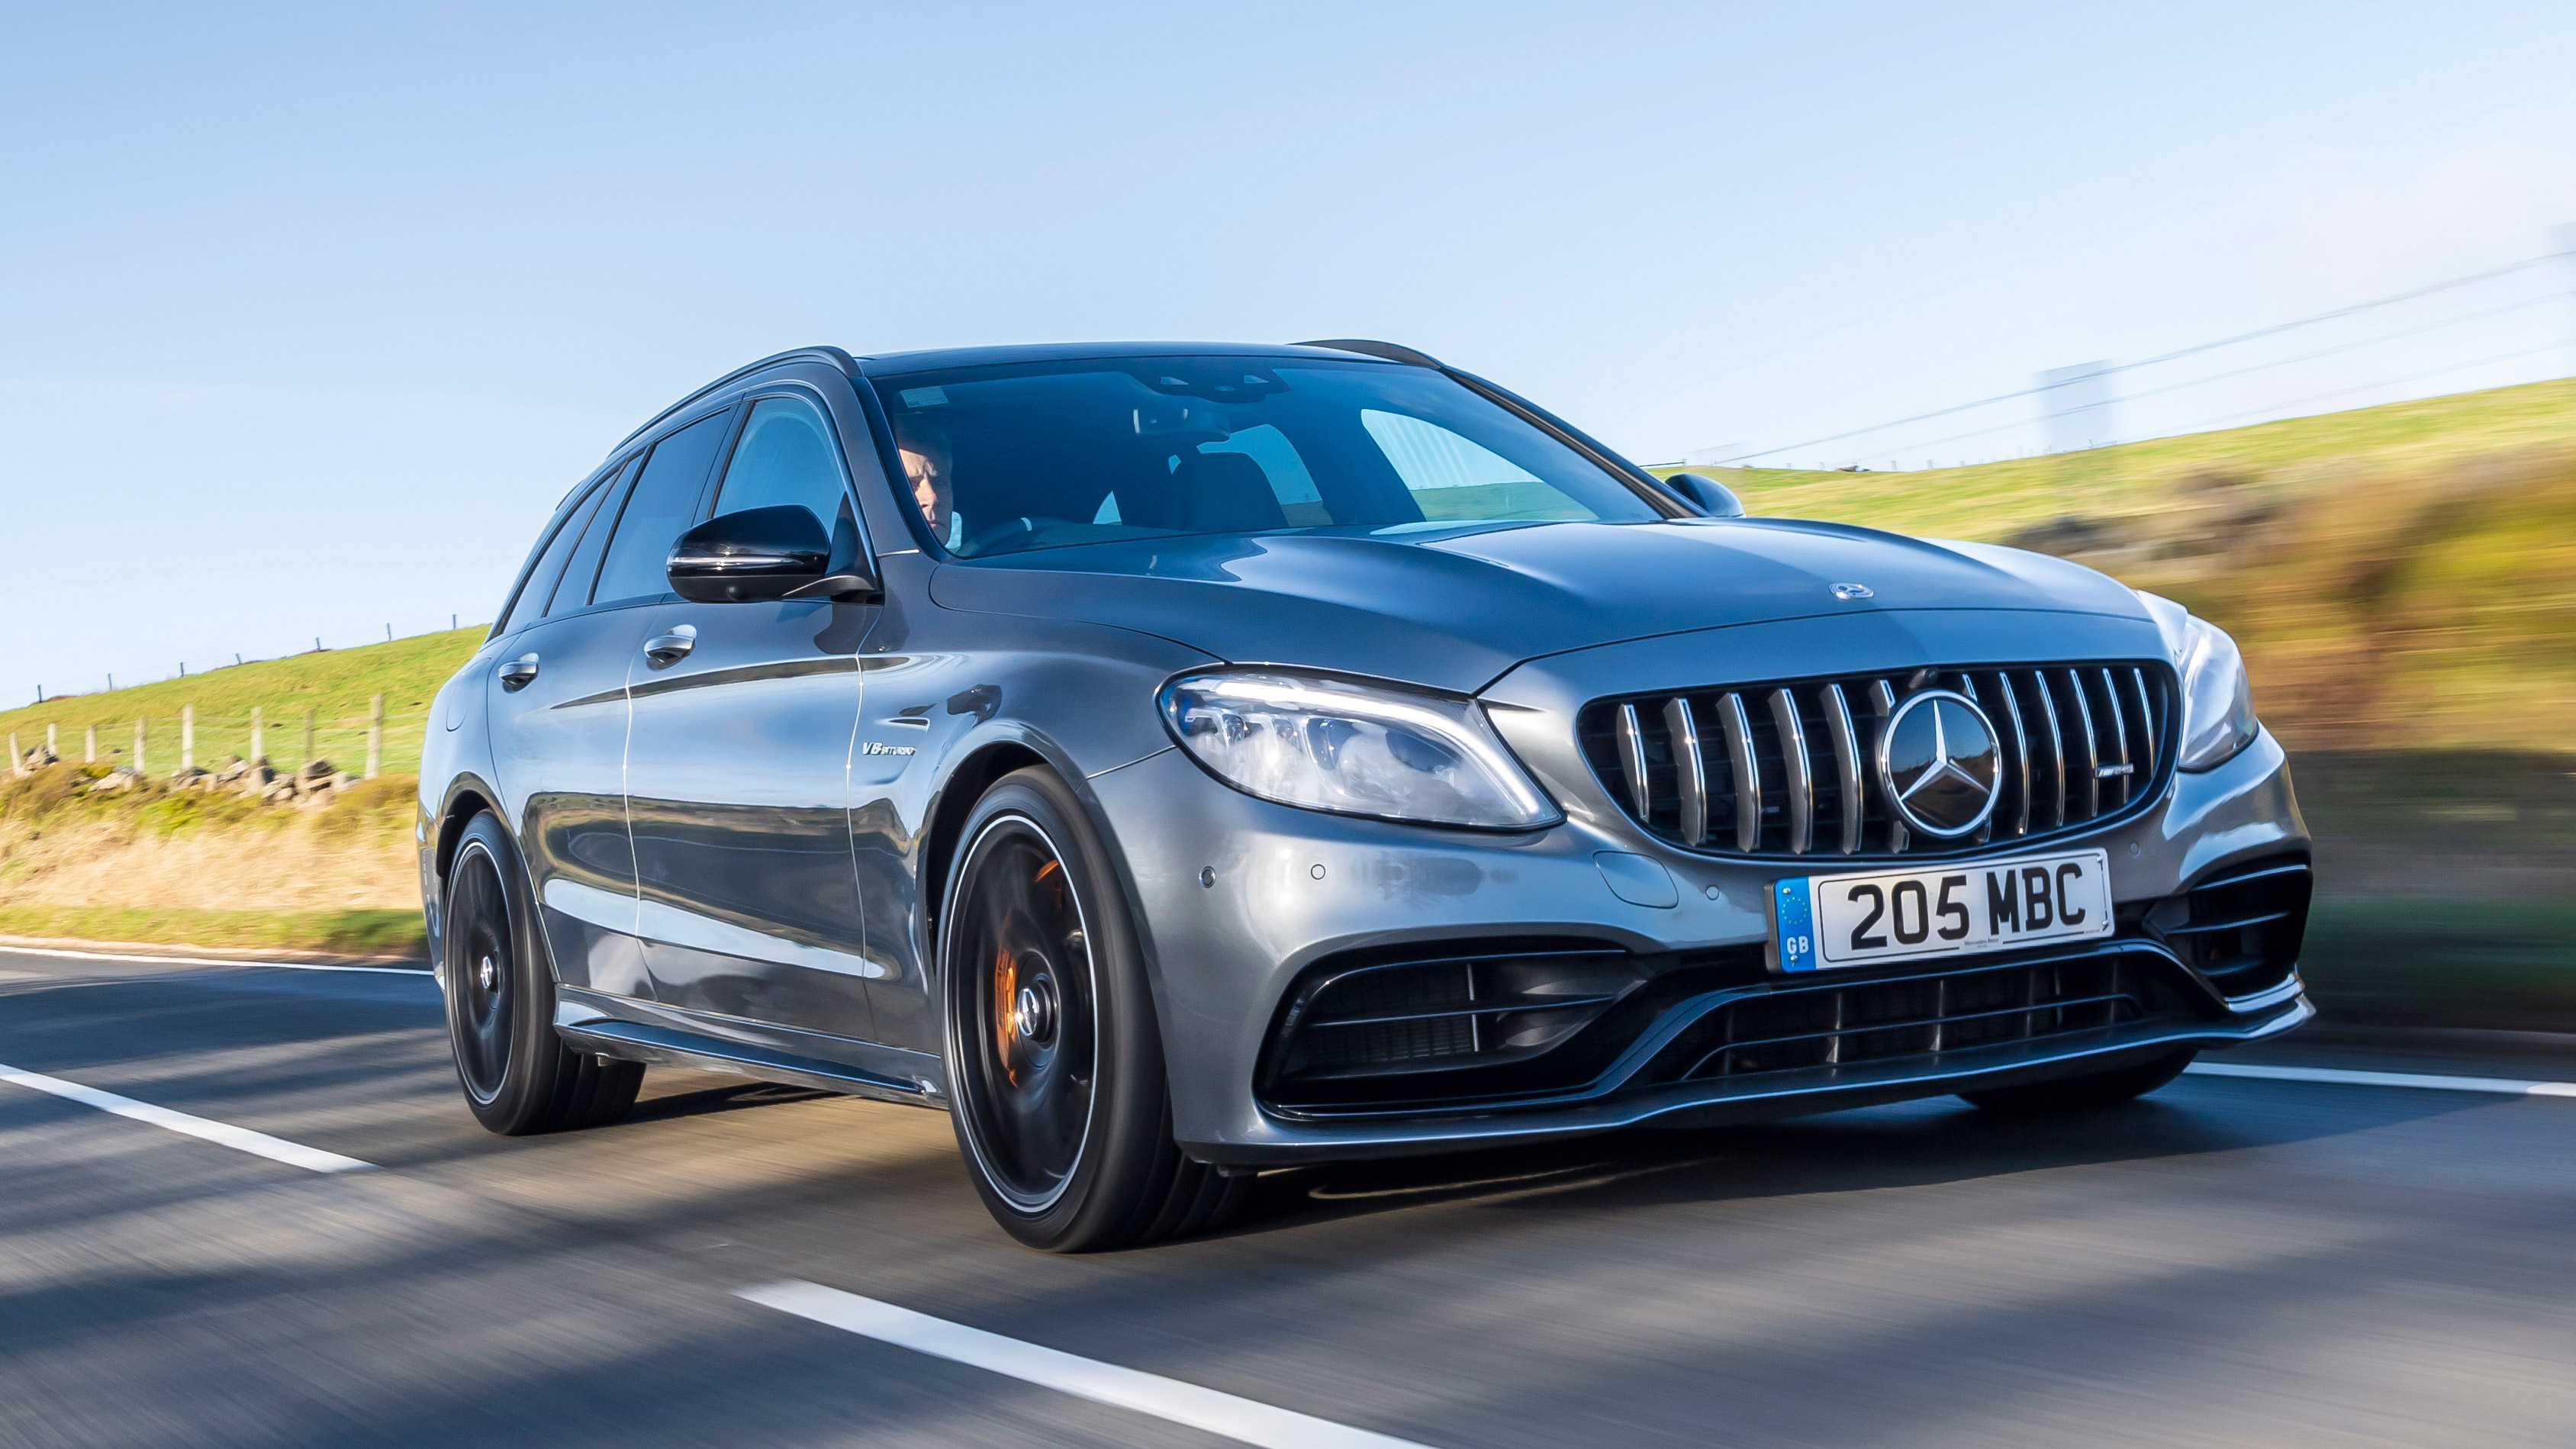 Mercedes AMG C63s (W205) Full In-depth Review!